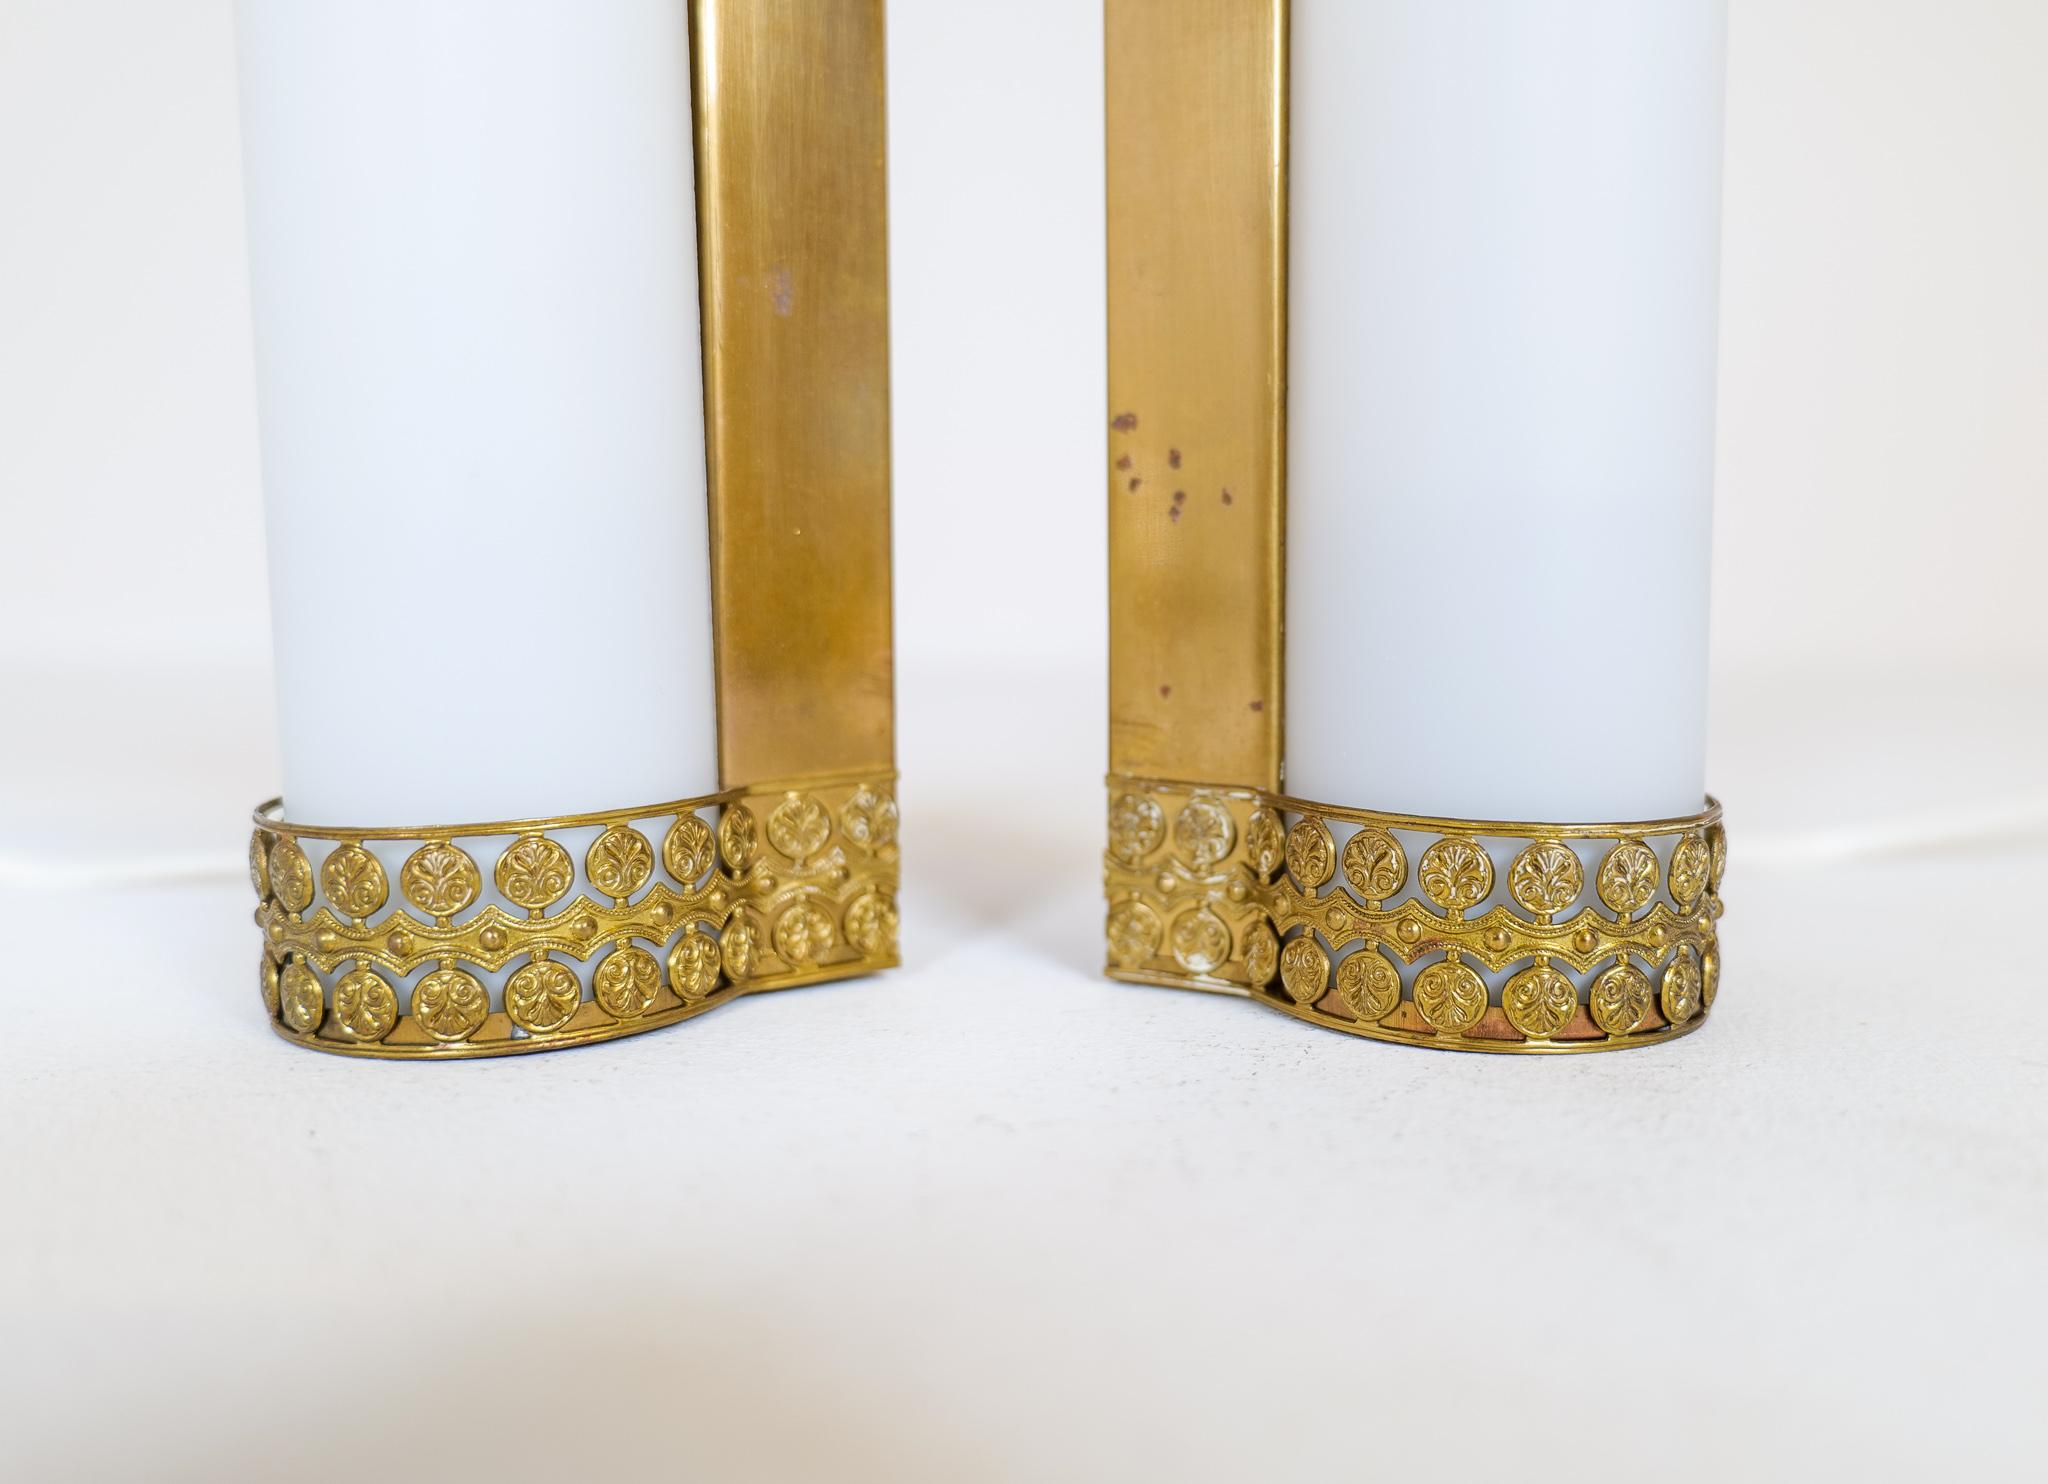 Midcentury Modern Pair of Brass and Opaline Wall Lamps Attributed to Asea Sweden In Good Condition For Sale In Hillringsberg, SE